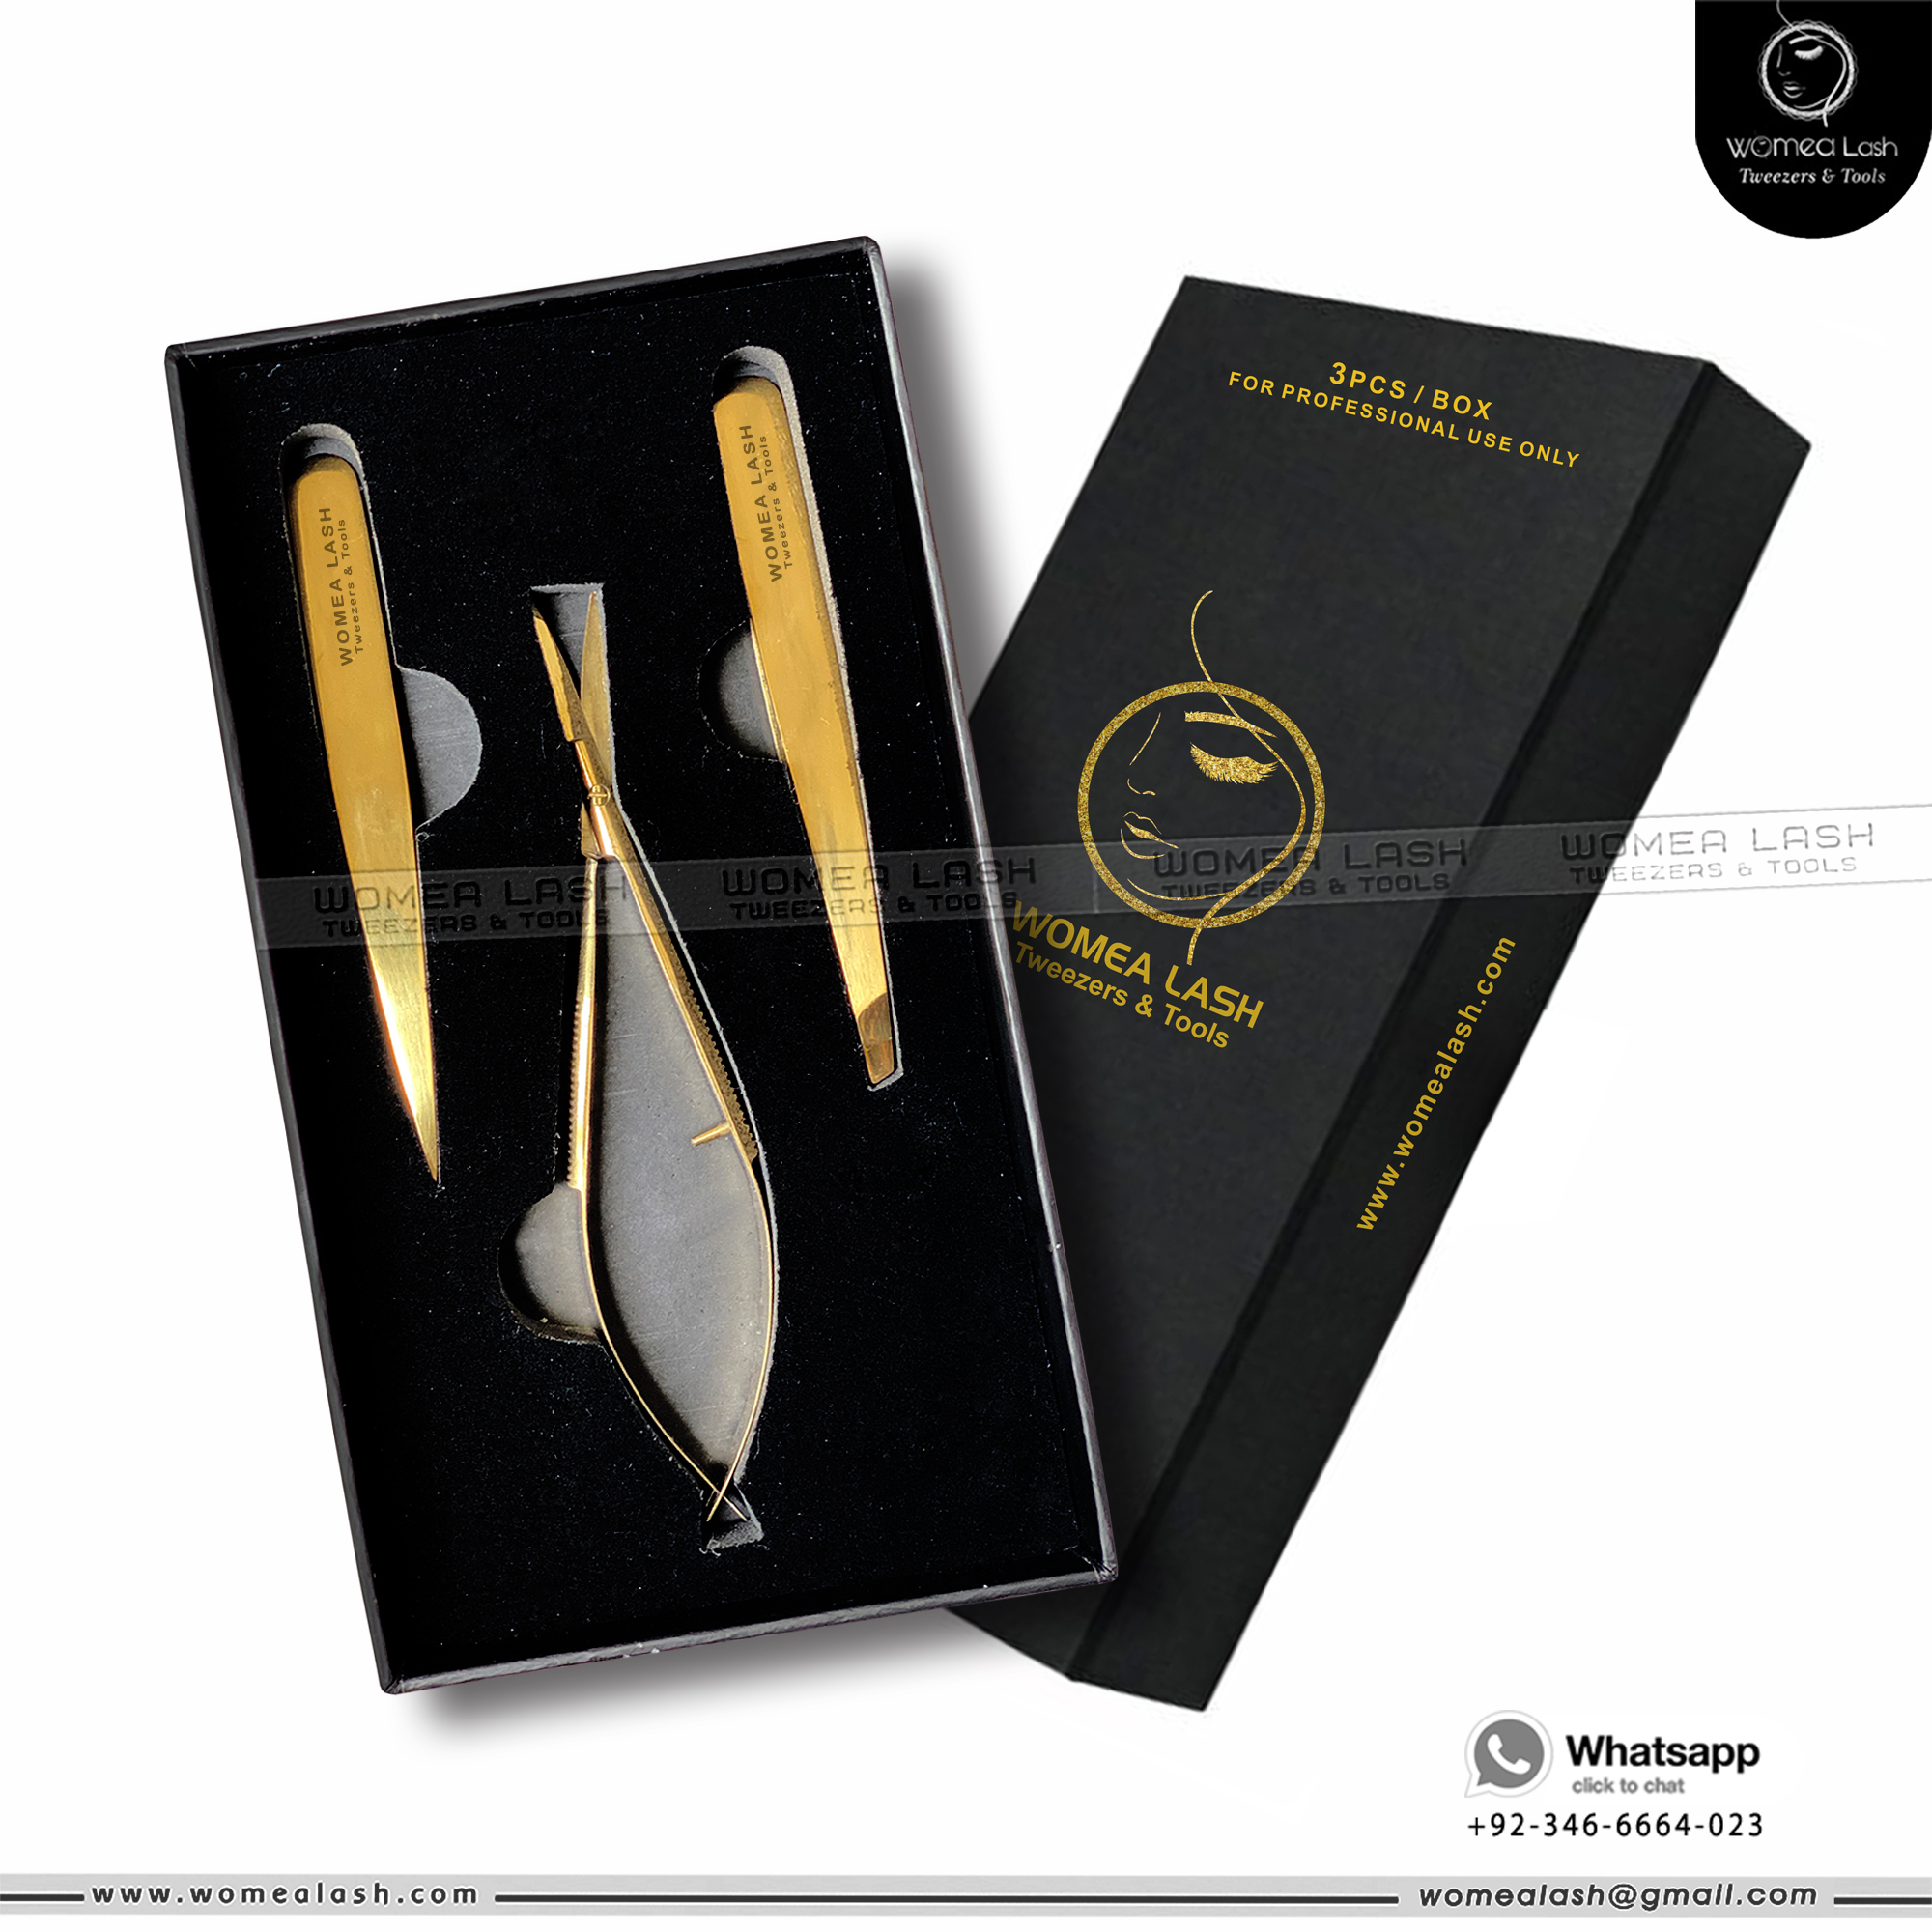 Professional Selling Custom Eyebrows Tweezers & Scissors With Art Card Packing Box Personal Use Only.